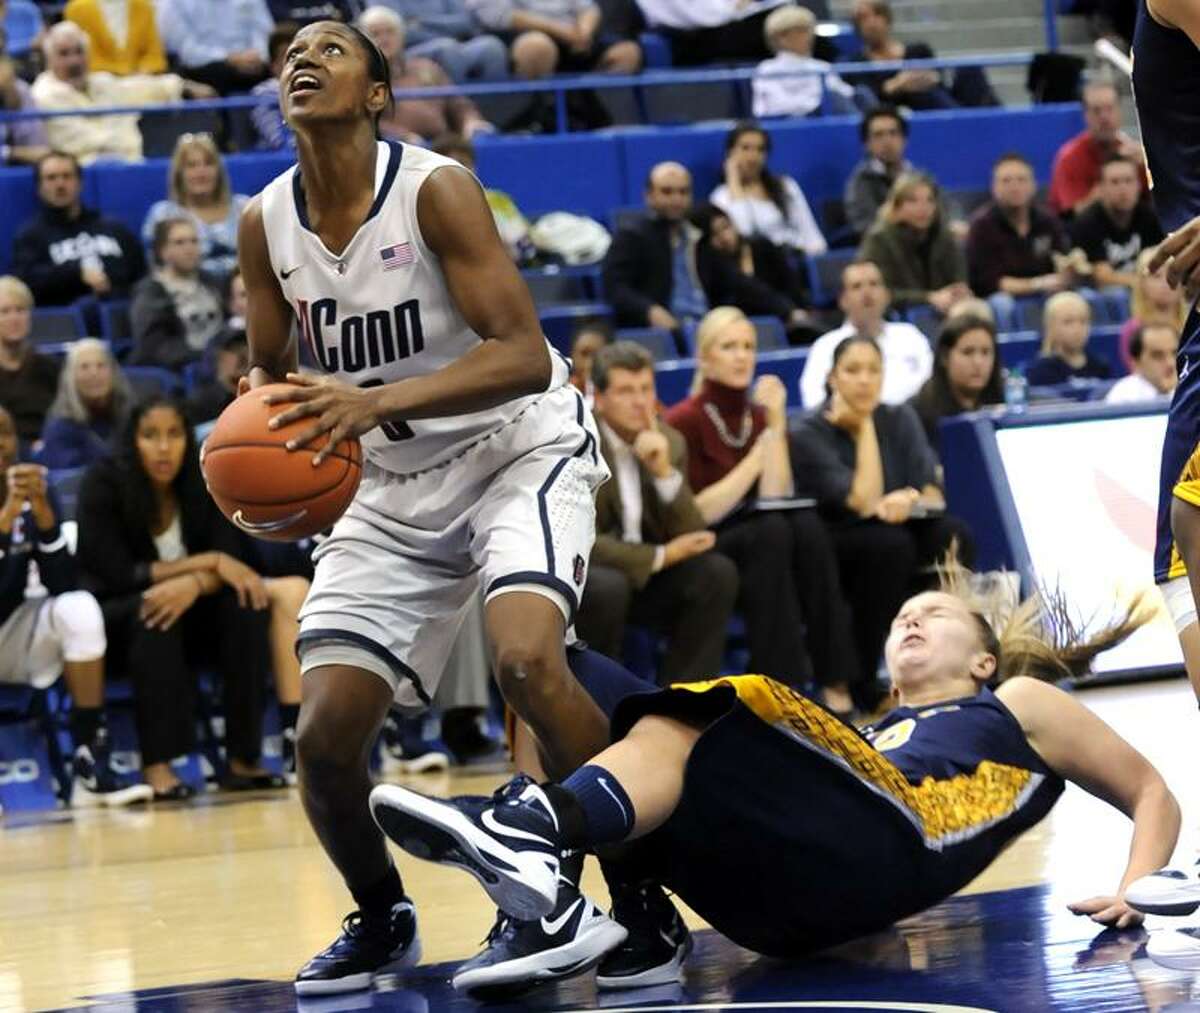 Connecticut's Tiffany Hayes looks for a shot past Pace's Margo Hackett in the second half of an exhibition NCAA college basketball game, Wednesday, Nov. 9, 2011, in Hartford, Conn. Connecticut defeated Pace 85-35. (AP Photo/Bob Child)